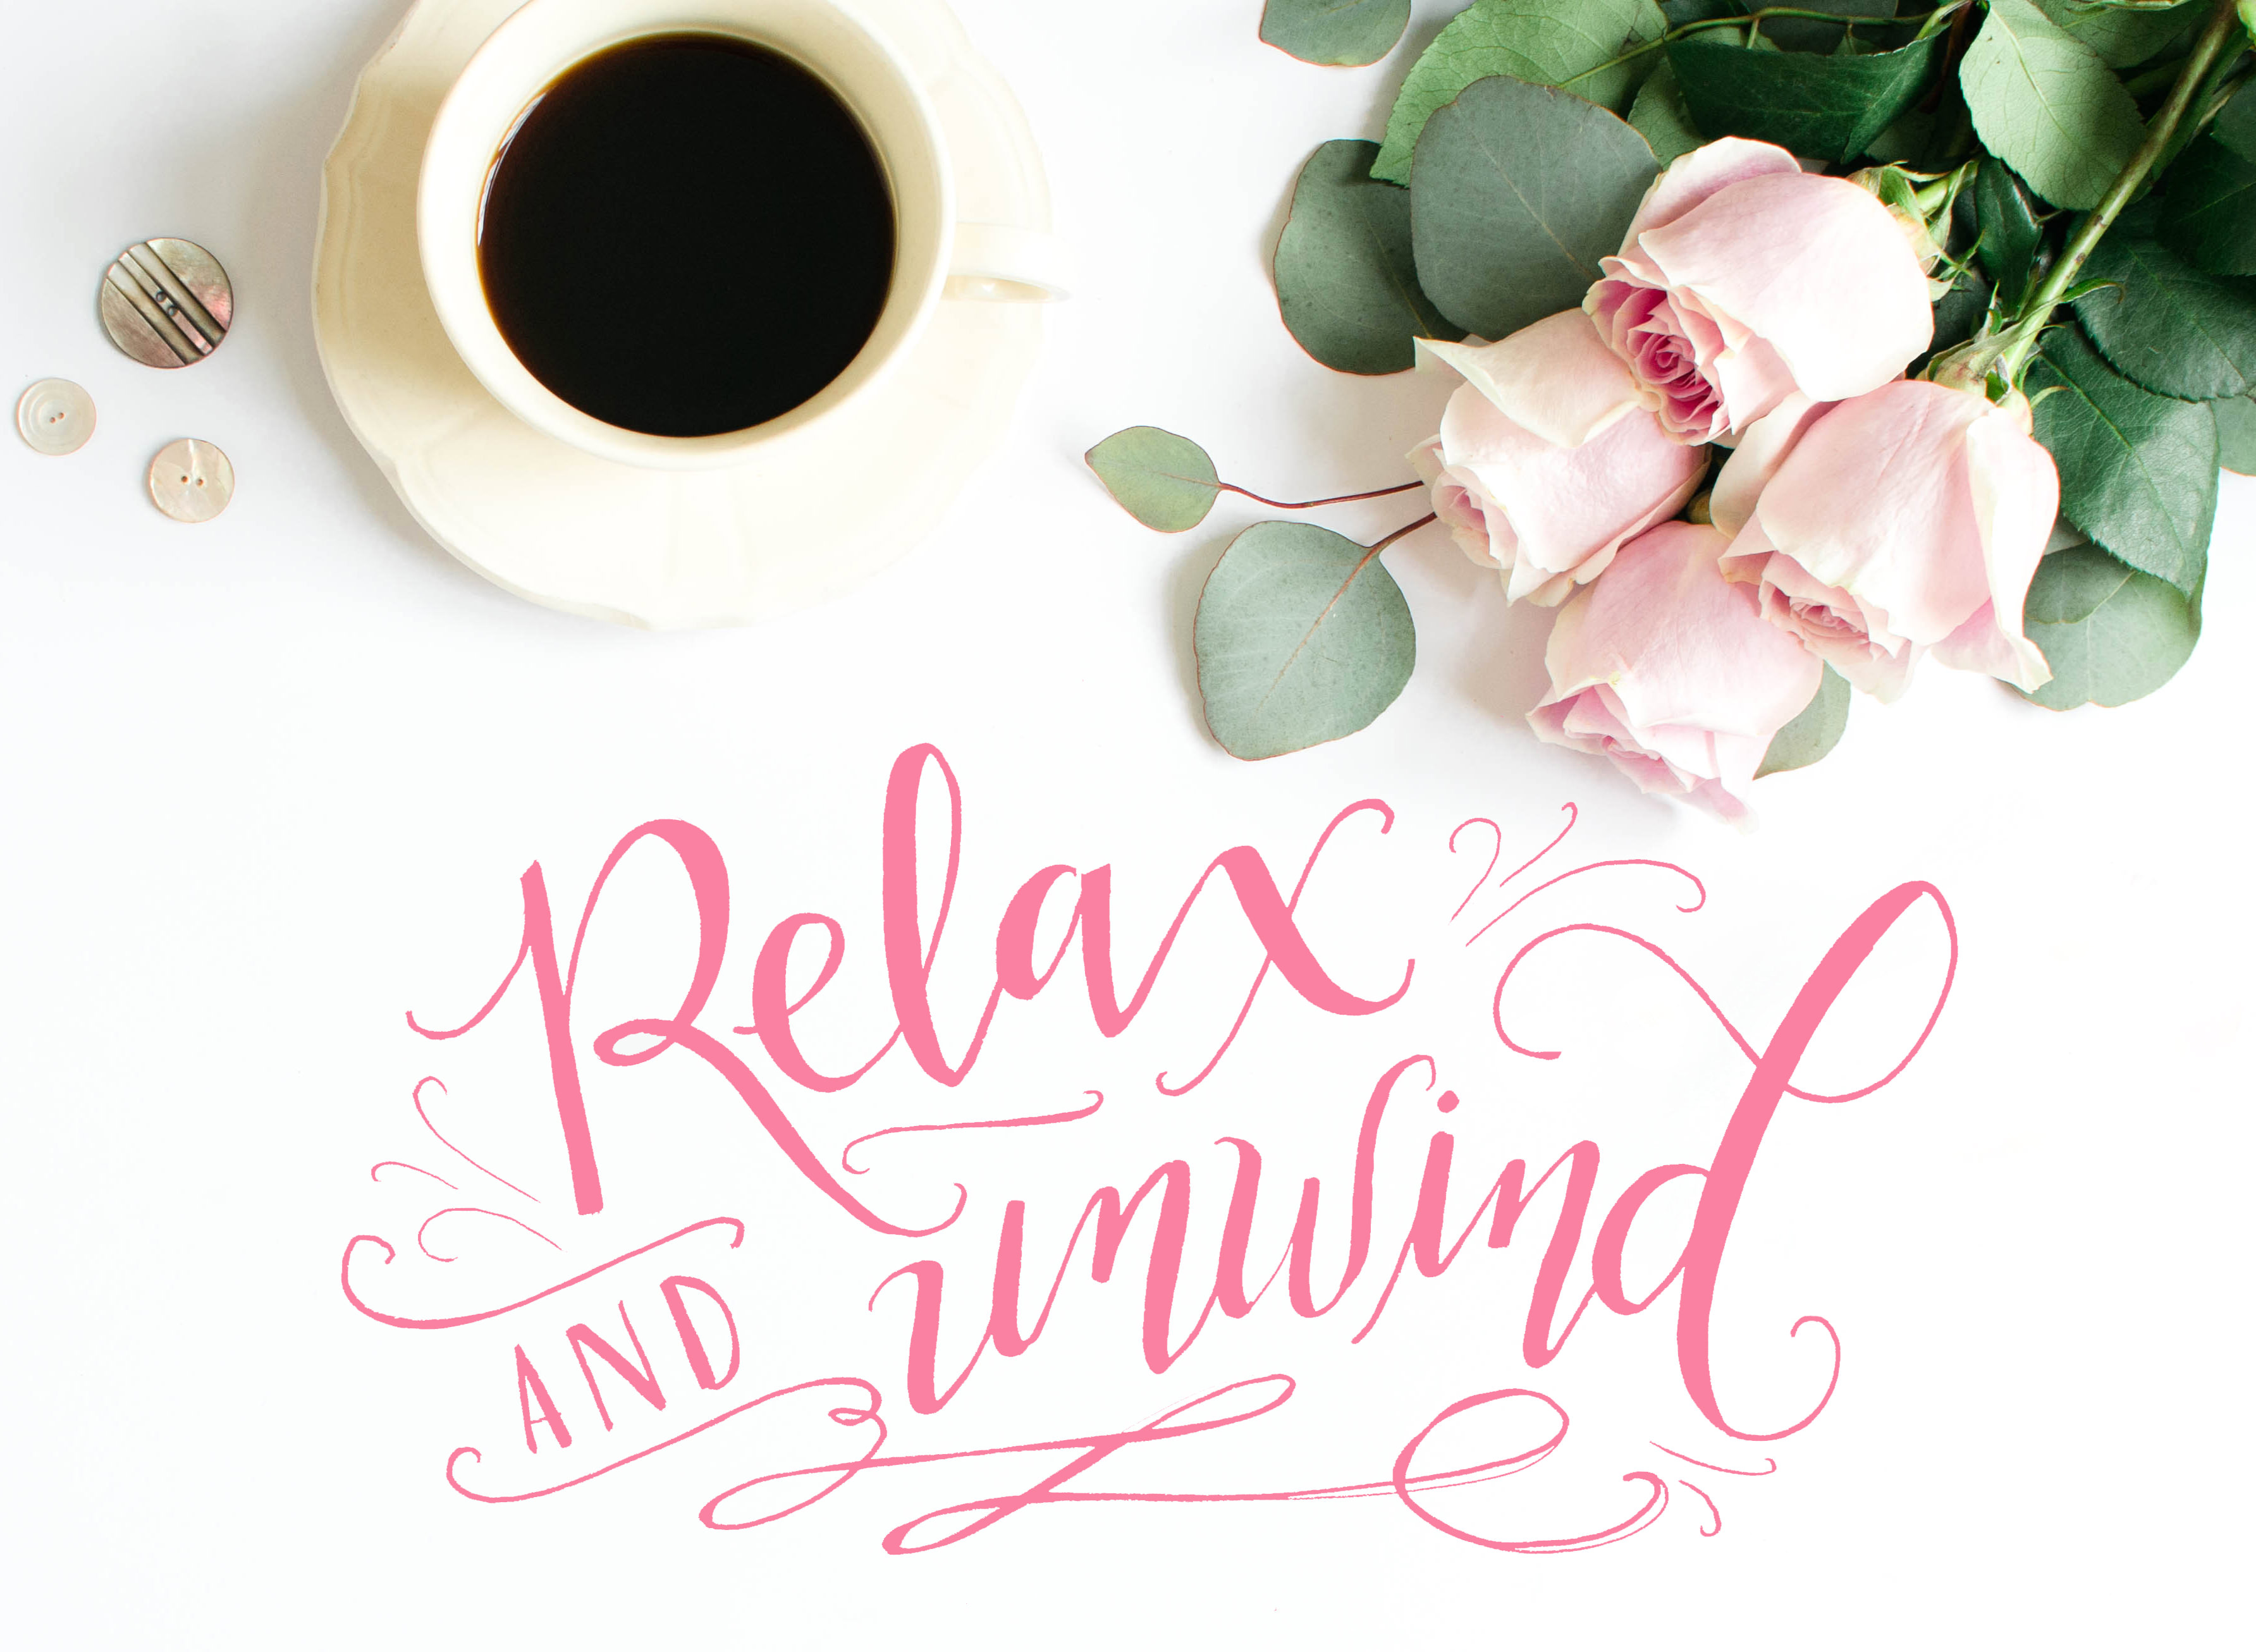 6 Tips for relaxing and unwinding in the evenings